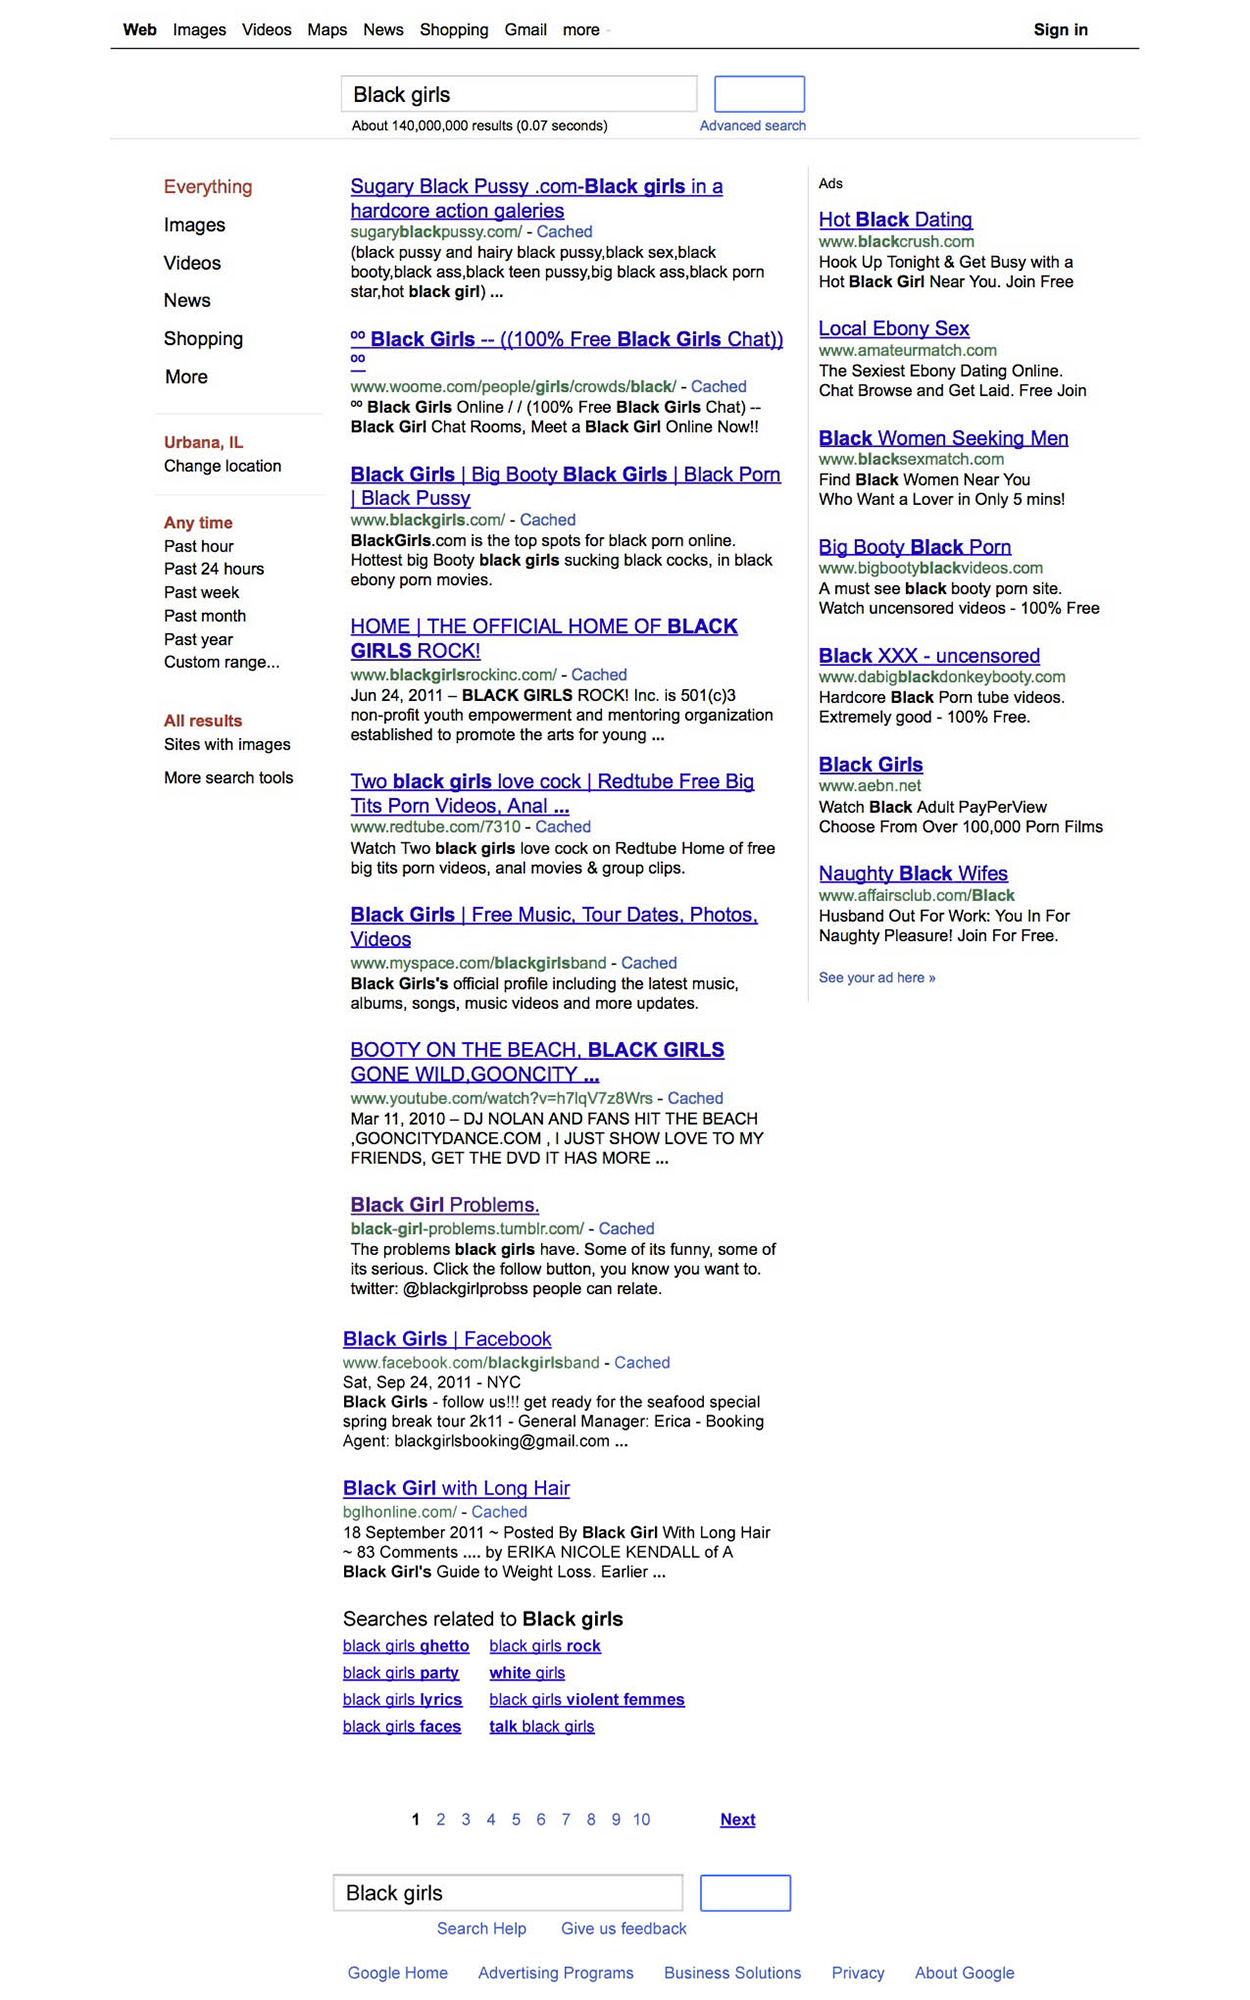 First page of search results on keywords “black girls,” September 18, 2011. (Courtesy Safiya Noble)